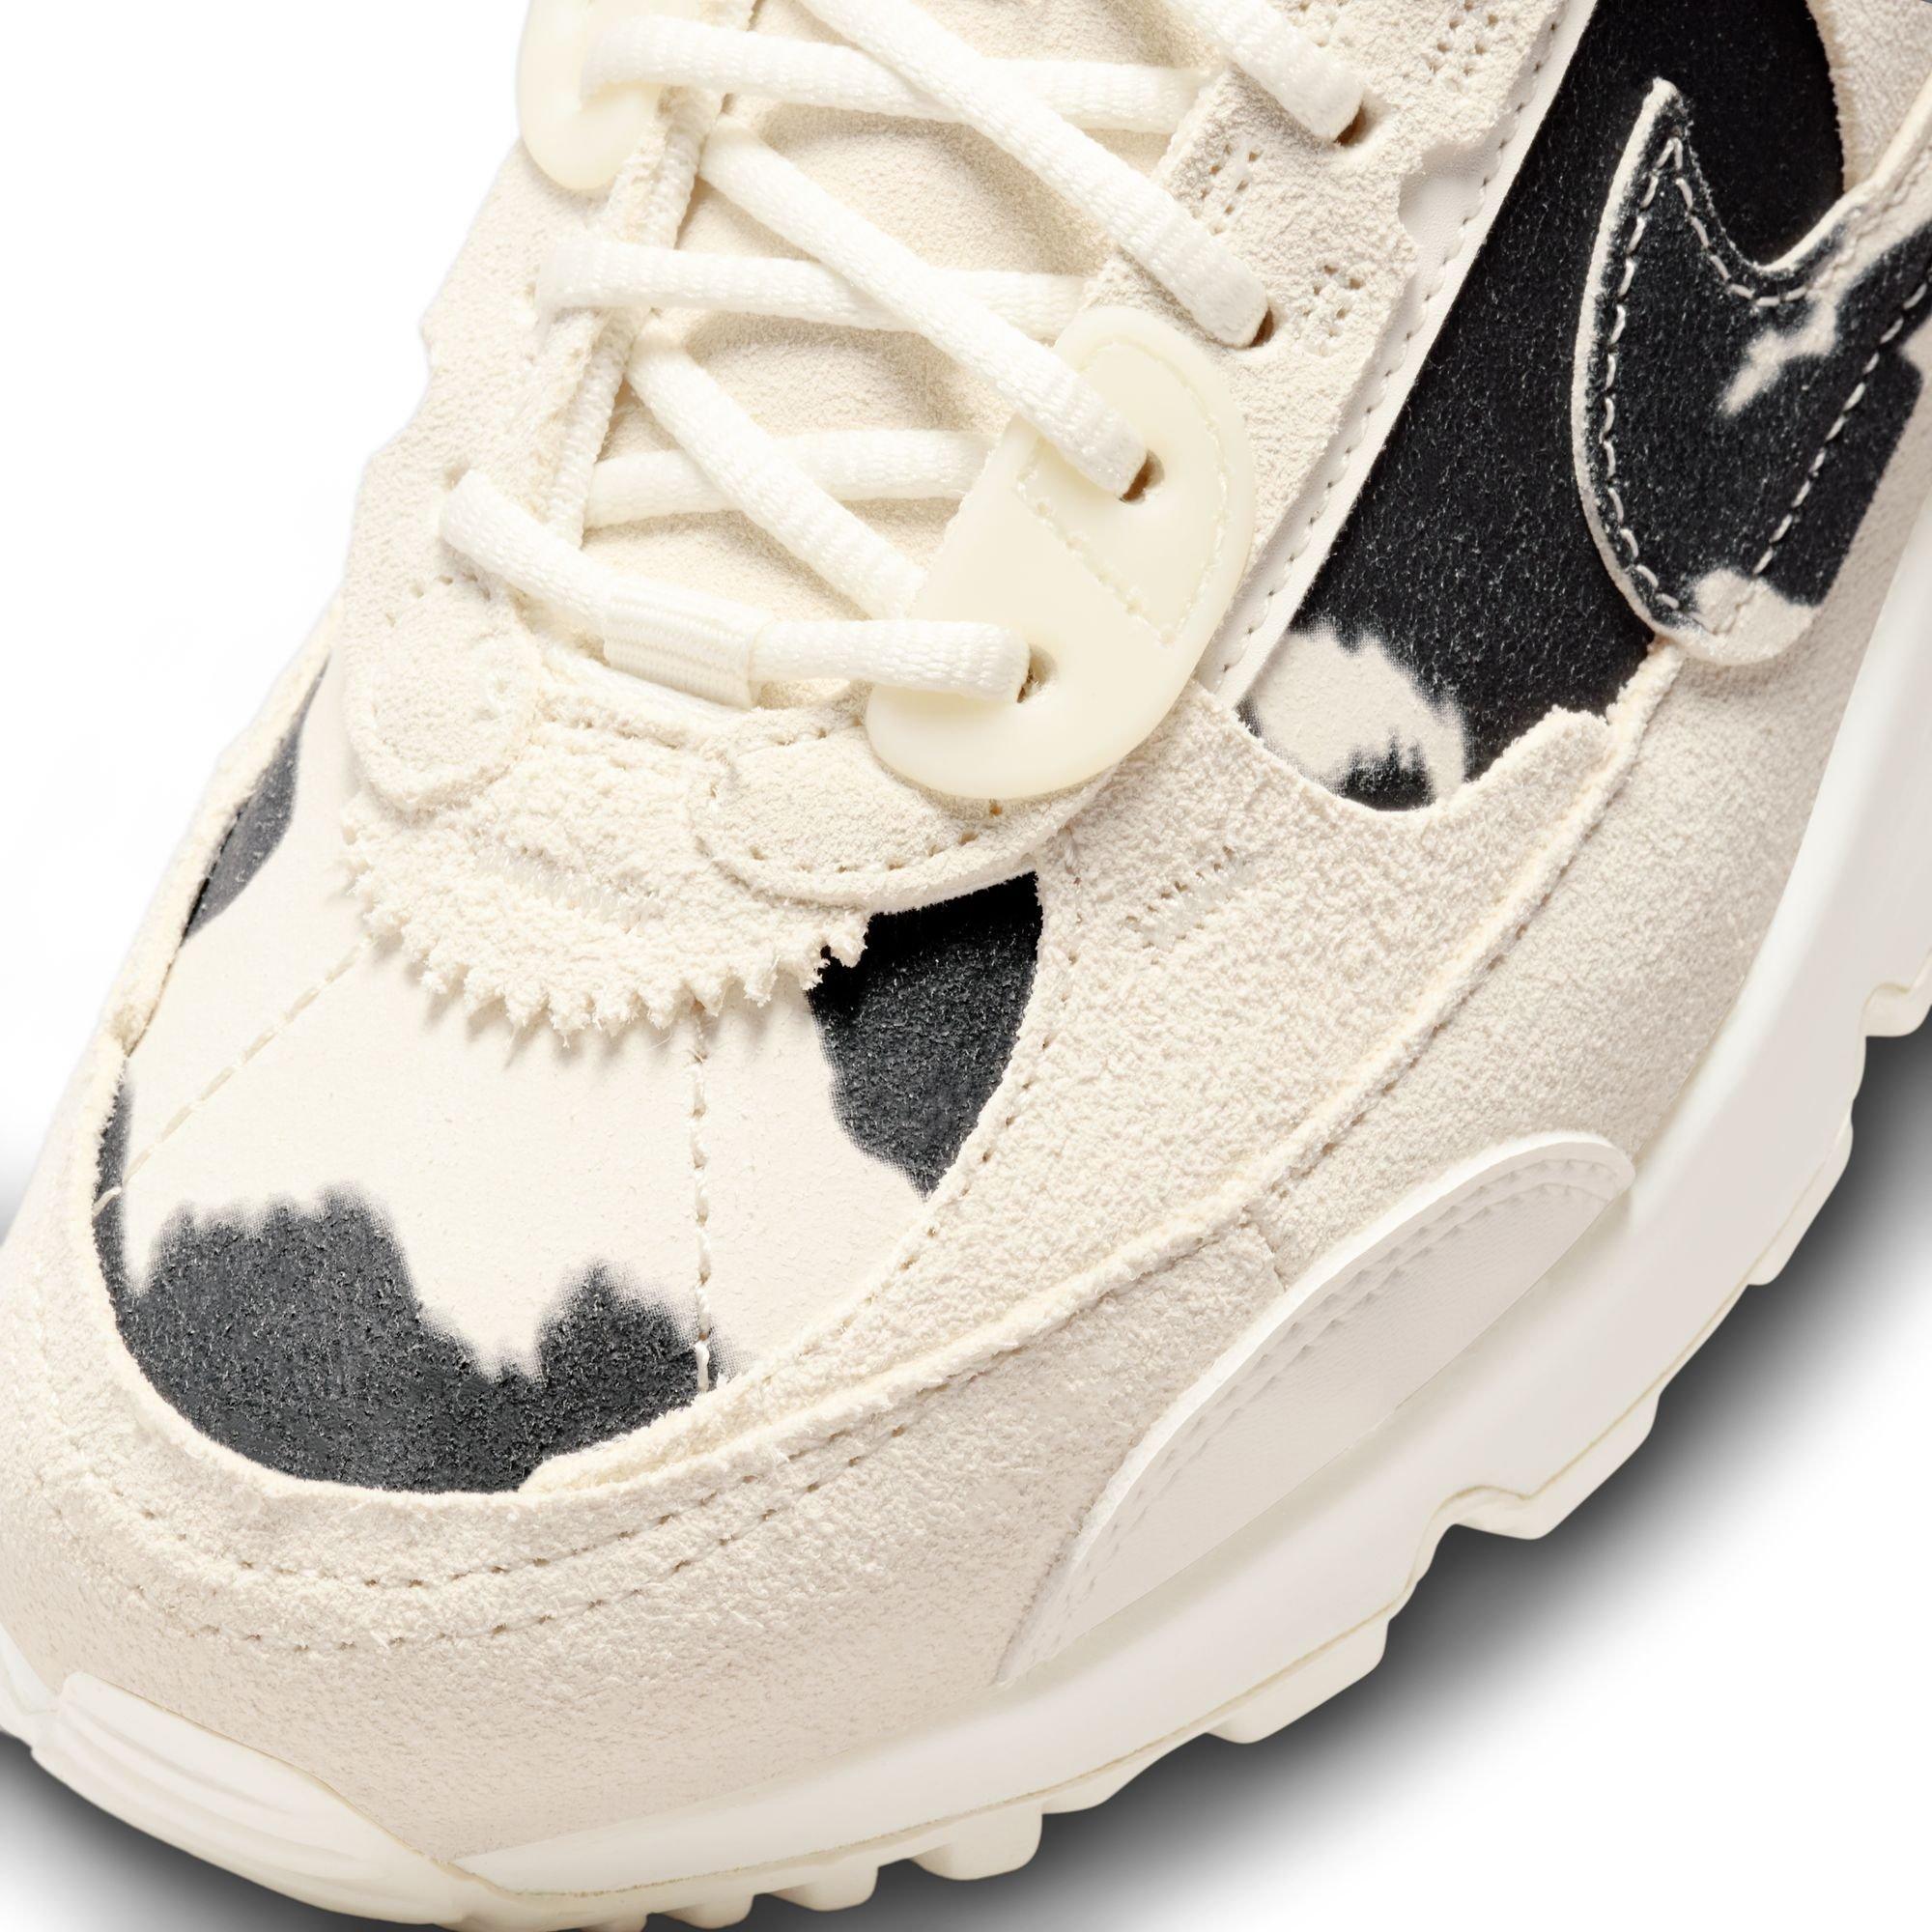 NIKE AIR MAX 90 FUTURA “COW PRINT” WOMEN'S SHOES This offering of